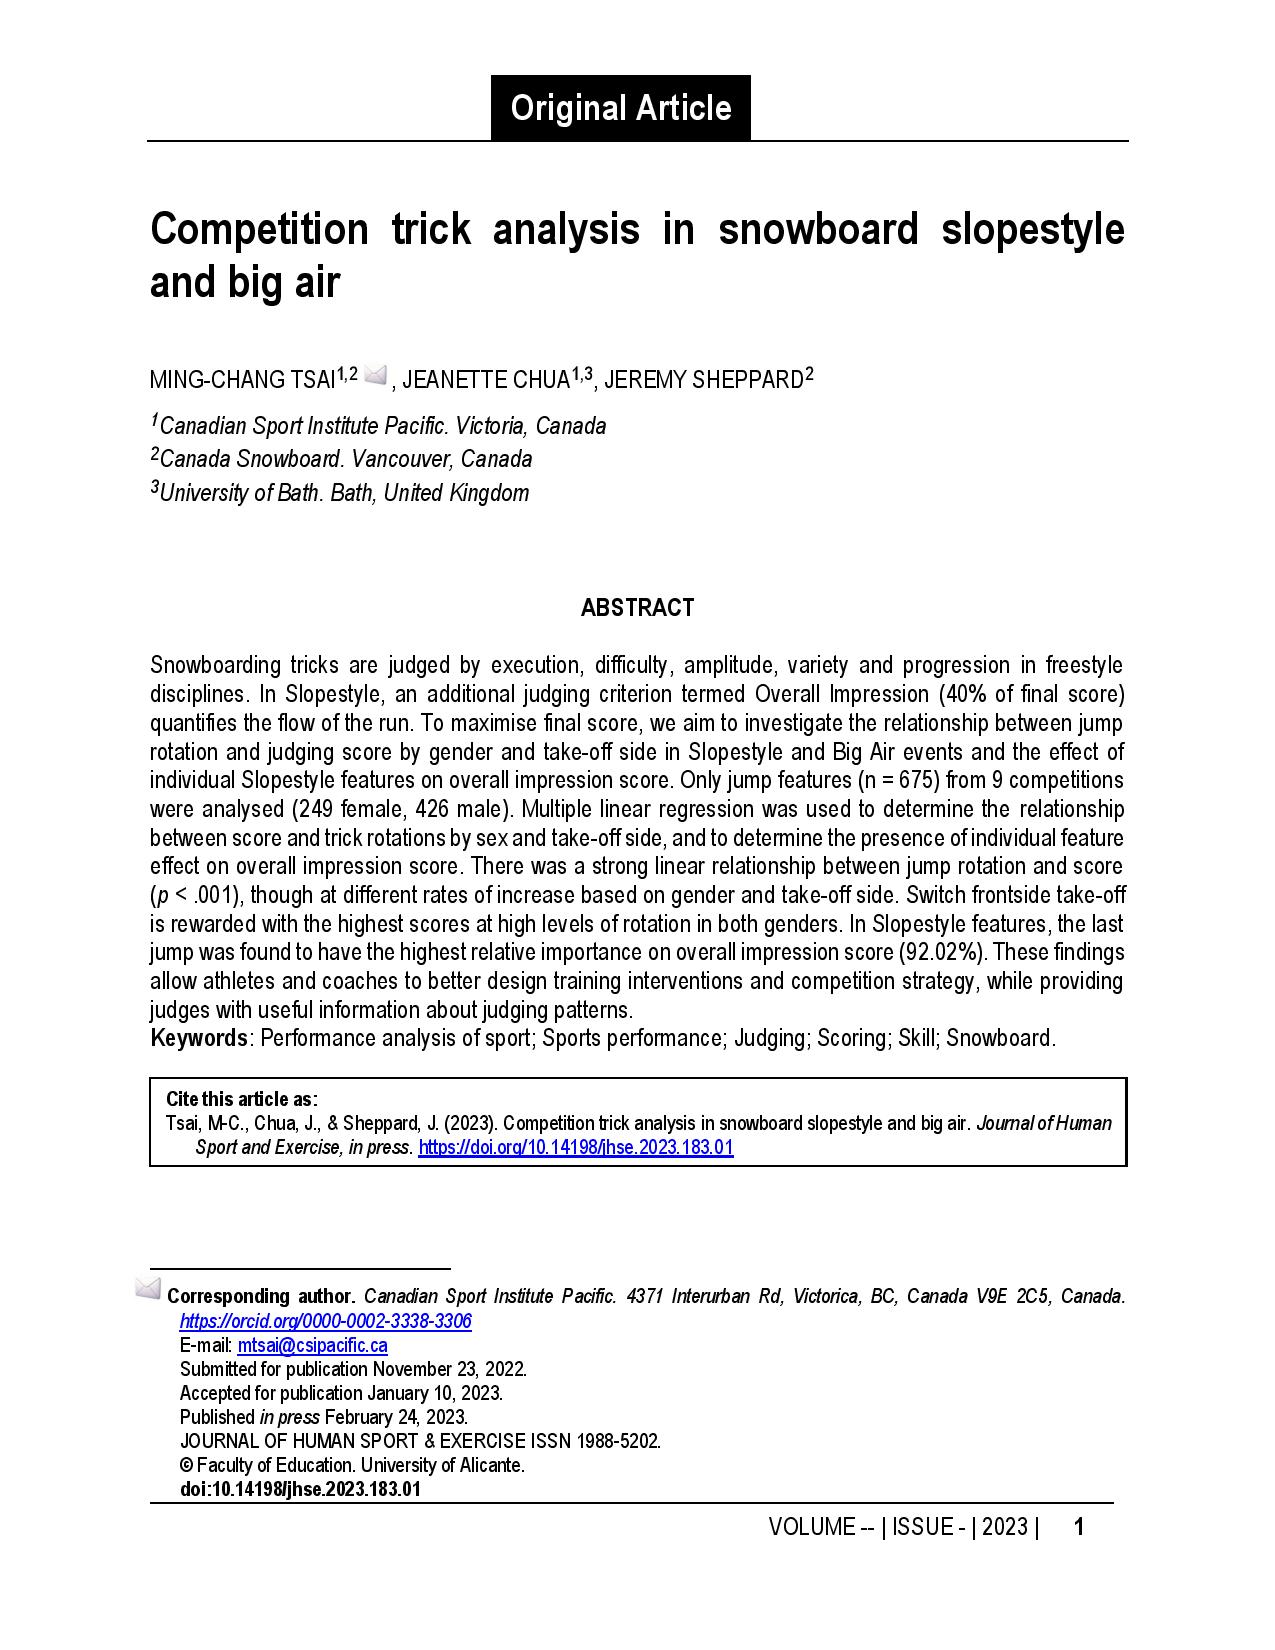 Competition trick analysis in snowboard slopestyle and big air